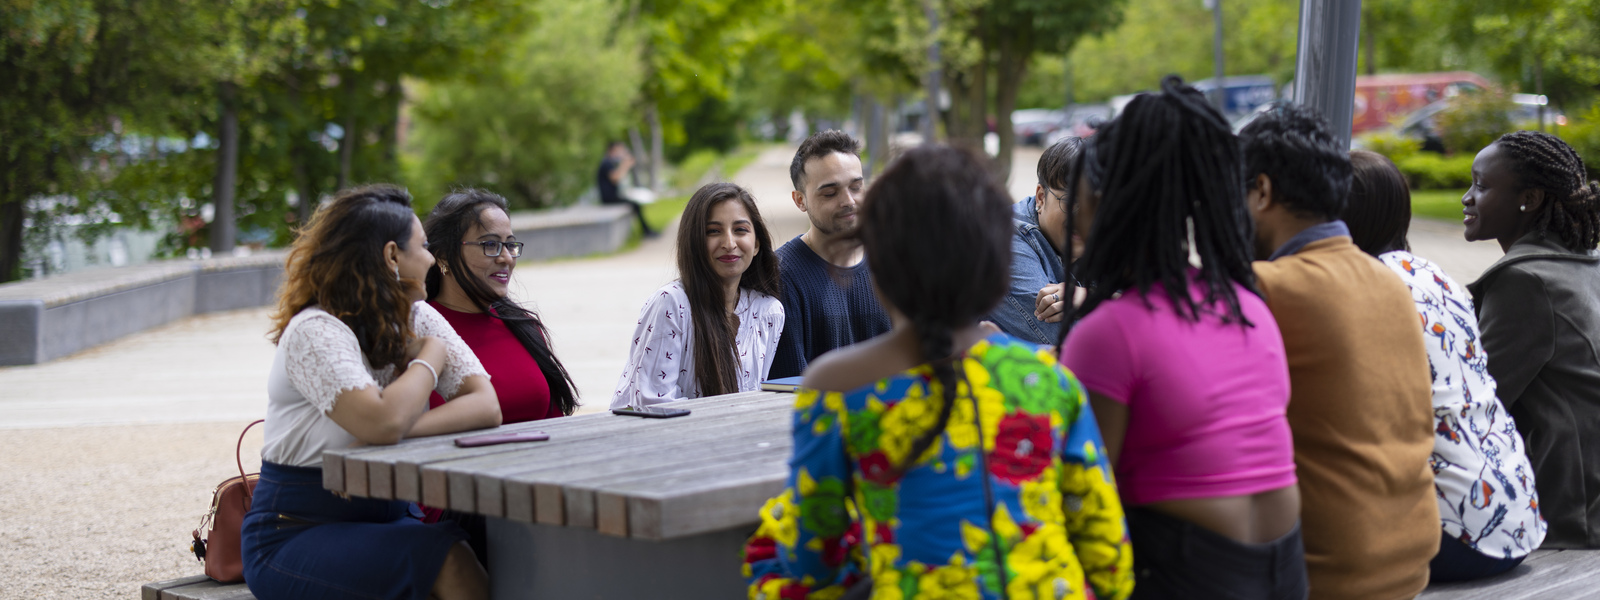 Students chatting on a bench on campus